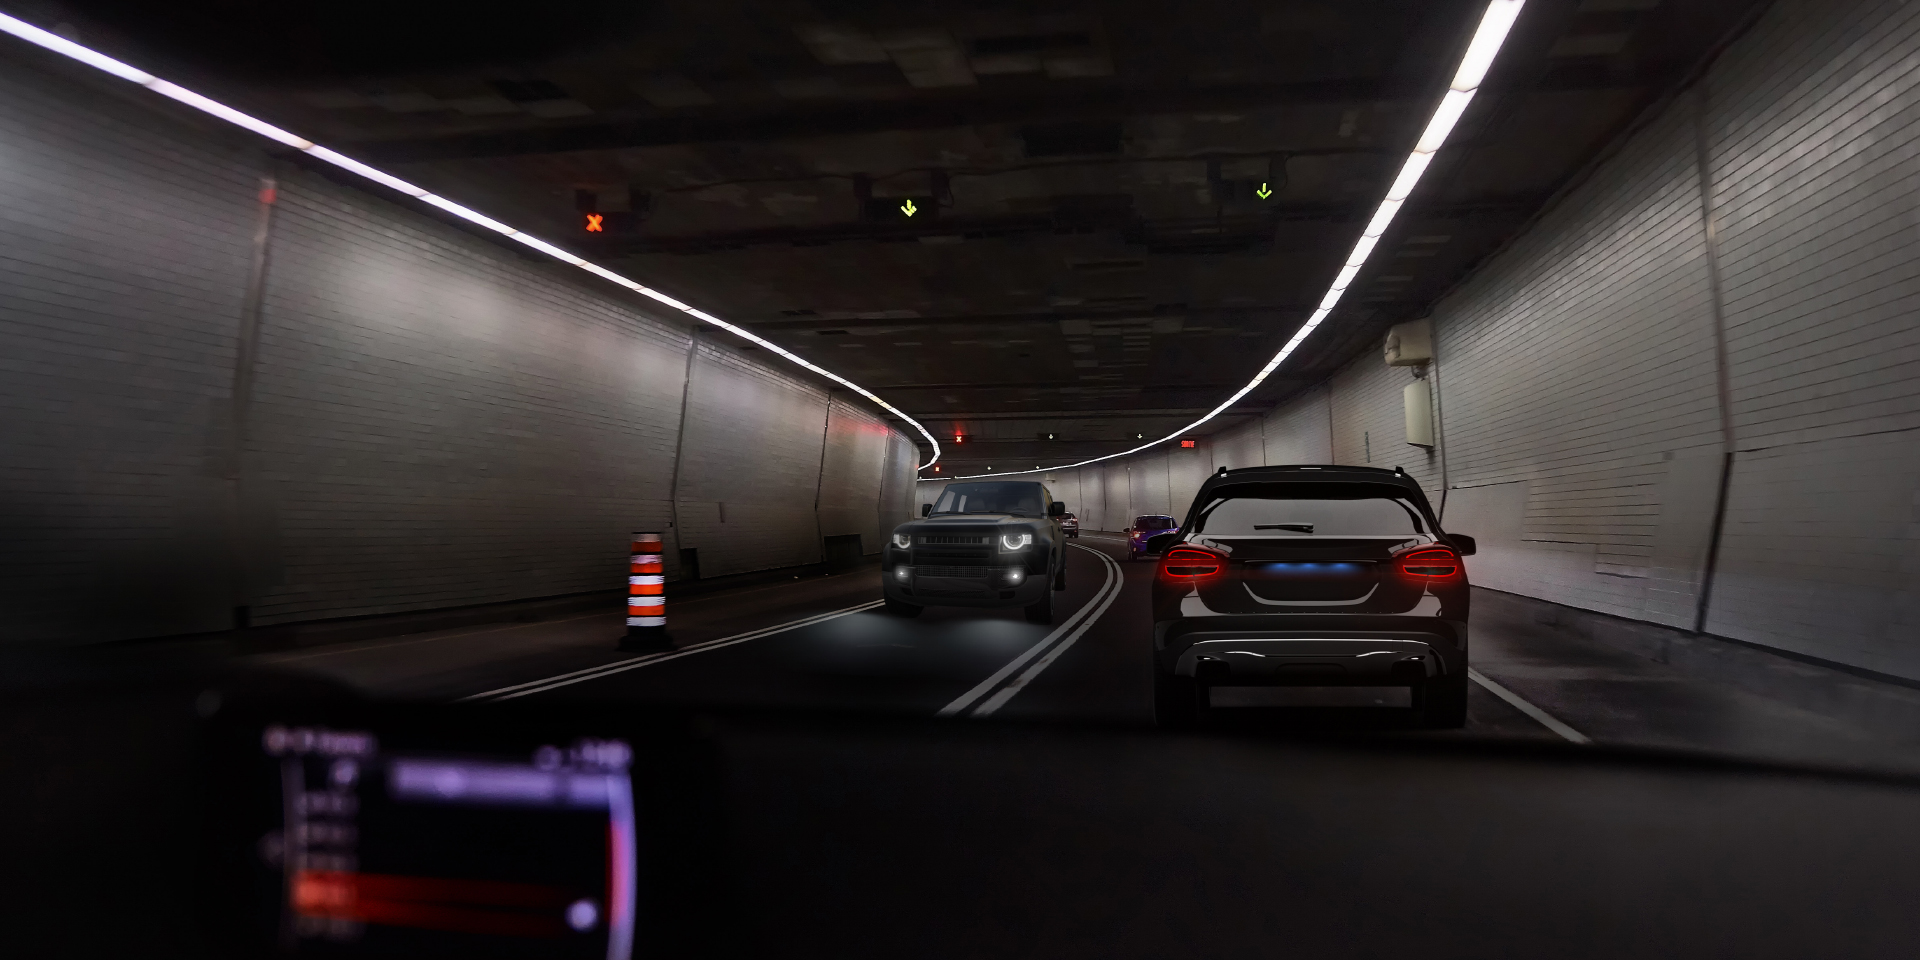 Two images of the point of view of a driver in a tunnel with oncoming traffic, showing on one image glare from the car and tunnel lights and on the other image clearly reduced glare.